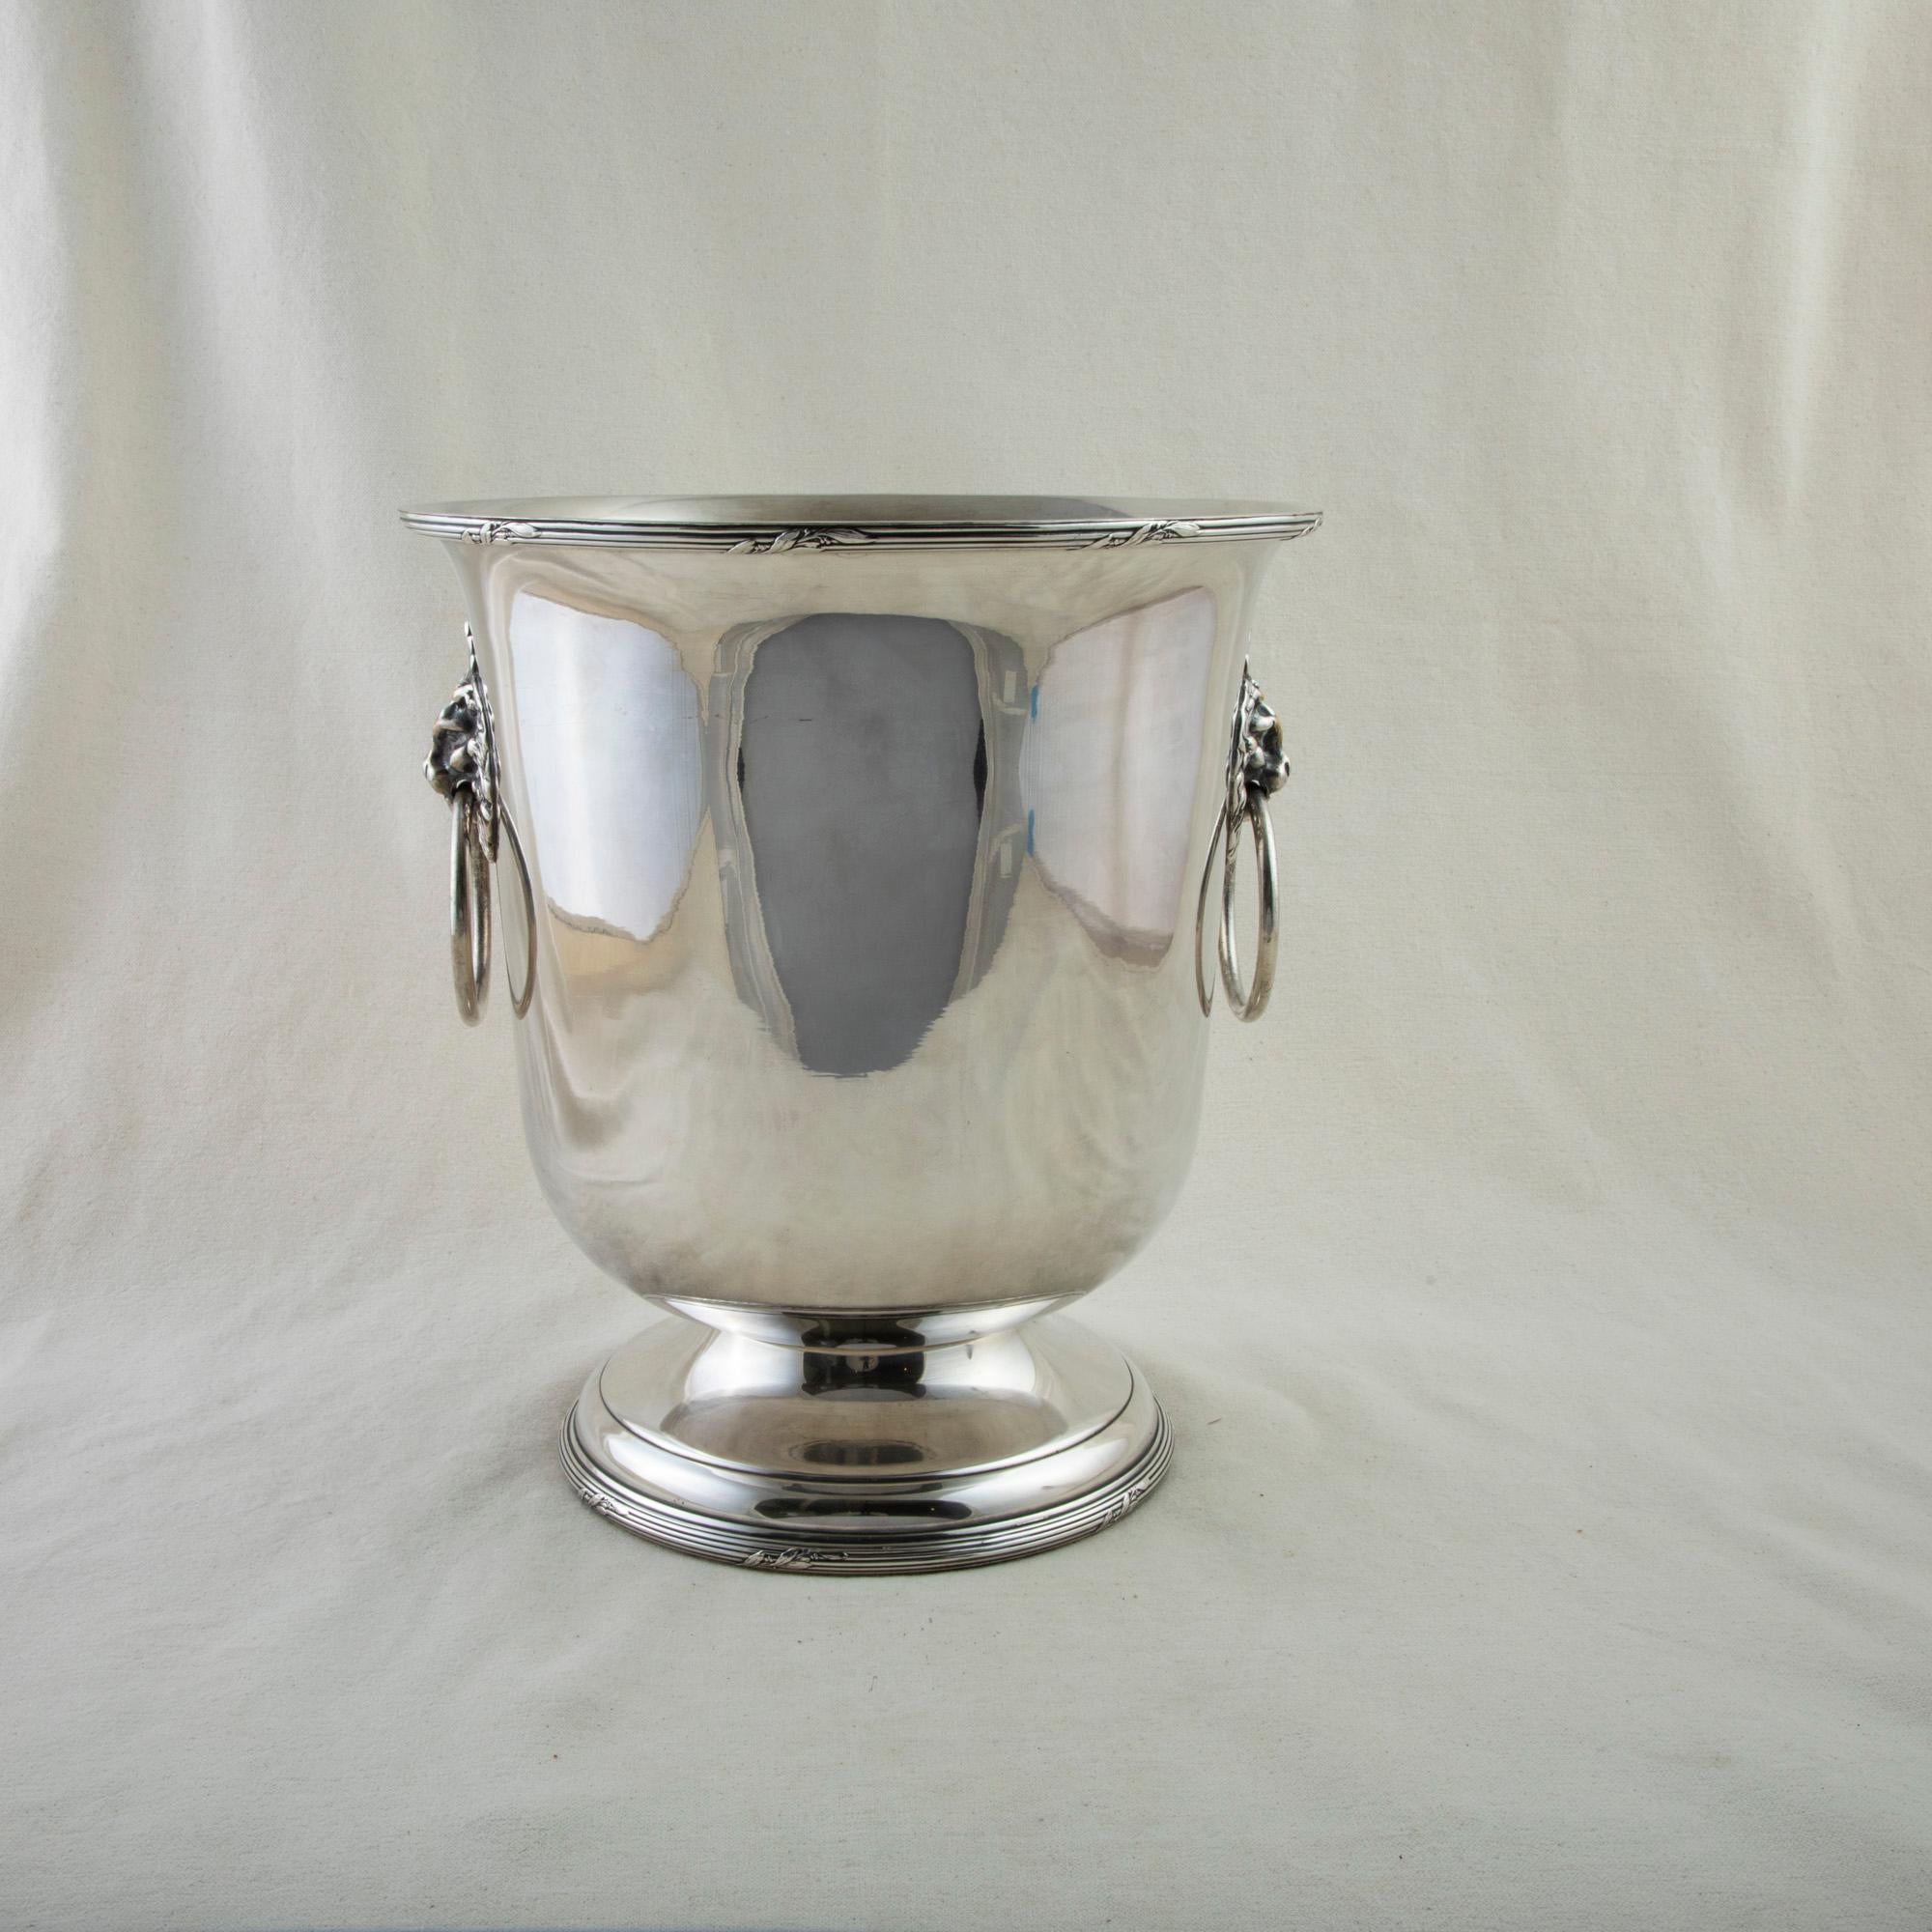 This mid twentieth century French silver plate champagne bucket features a lion's head on each side with a drop ring handle. The fluted upper rim is detailed with leaves, and the bucket stands on a footed base. It is stamped with a hallmark on the